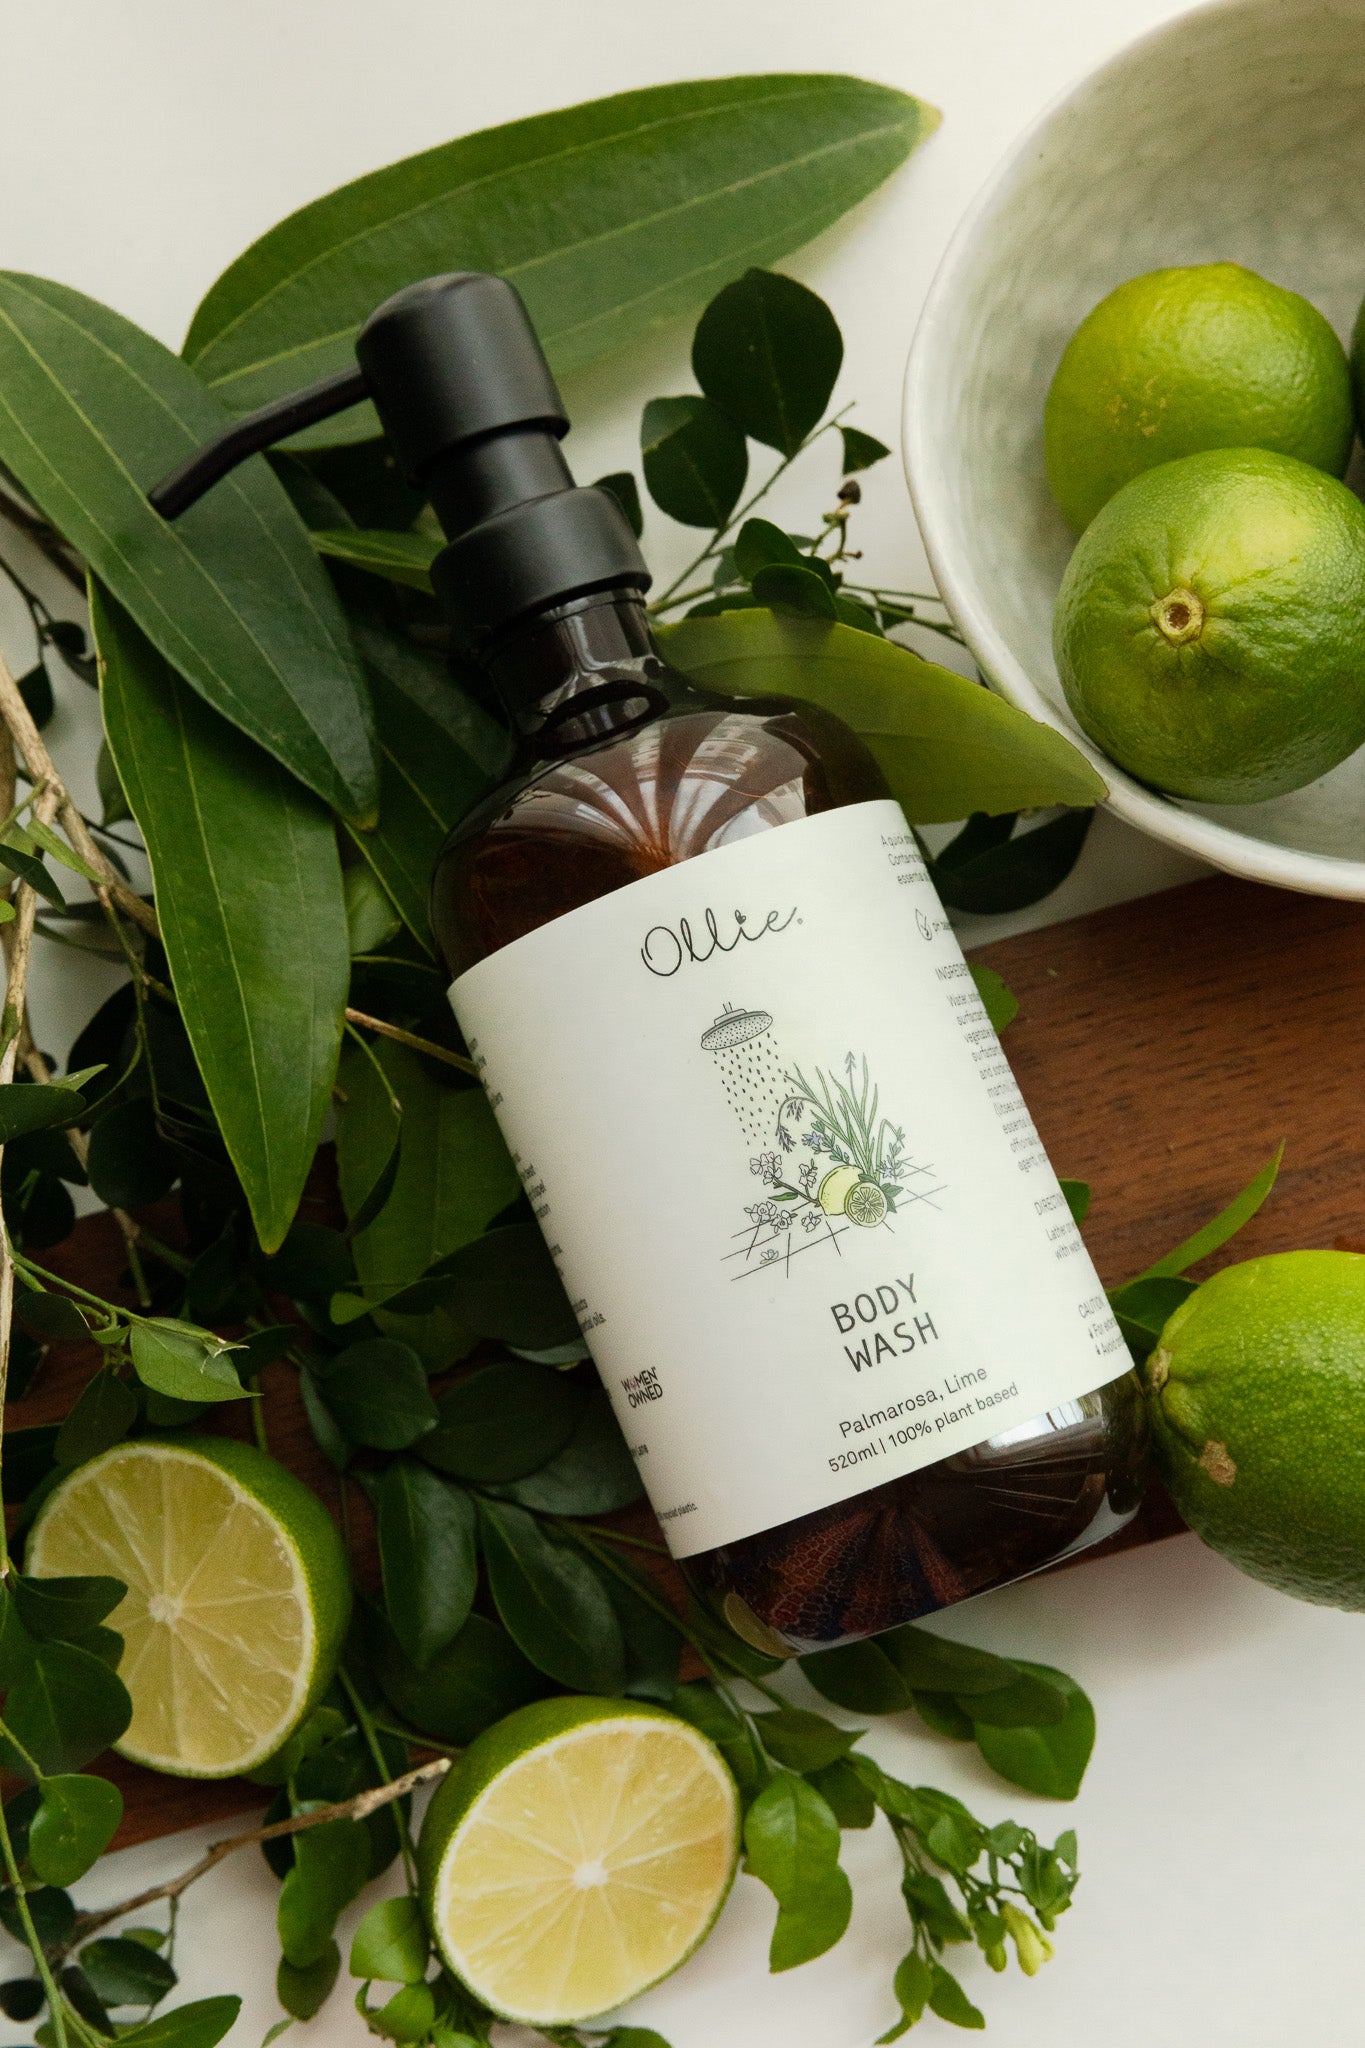 Ollie Body Wash (Palmarosa Lime) | Bodycare | The Green Collective SG